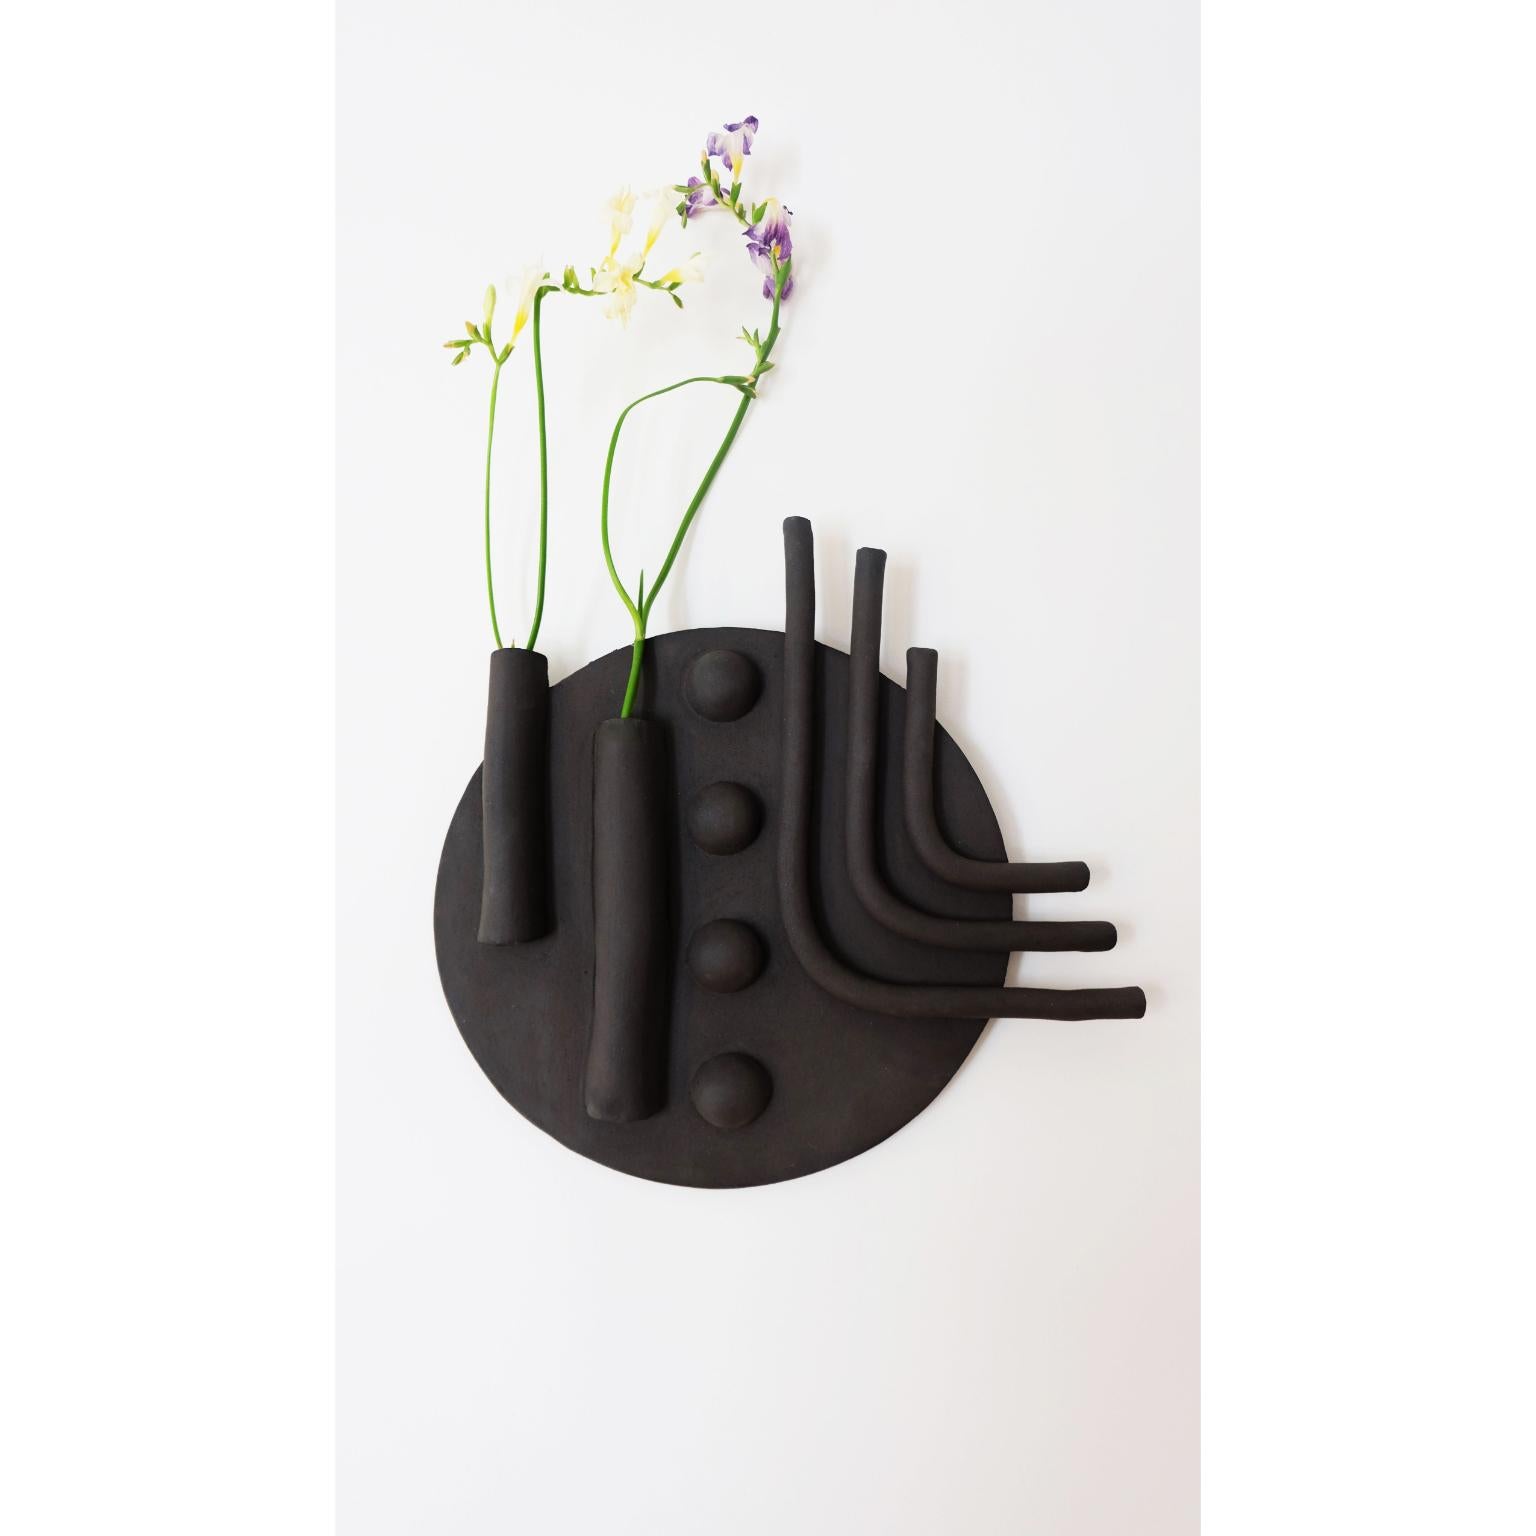 Unique Hyoo vase and wall sculpt by Ia Kutateladze
Dimensions: D 28 
Materials: Clay

A bold, sculpture for the wall that could also be used as a vase. Strong geometrical shapes brought together to create a unique decorative piece for any type